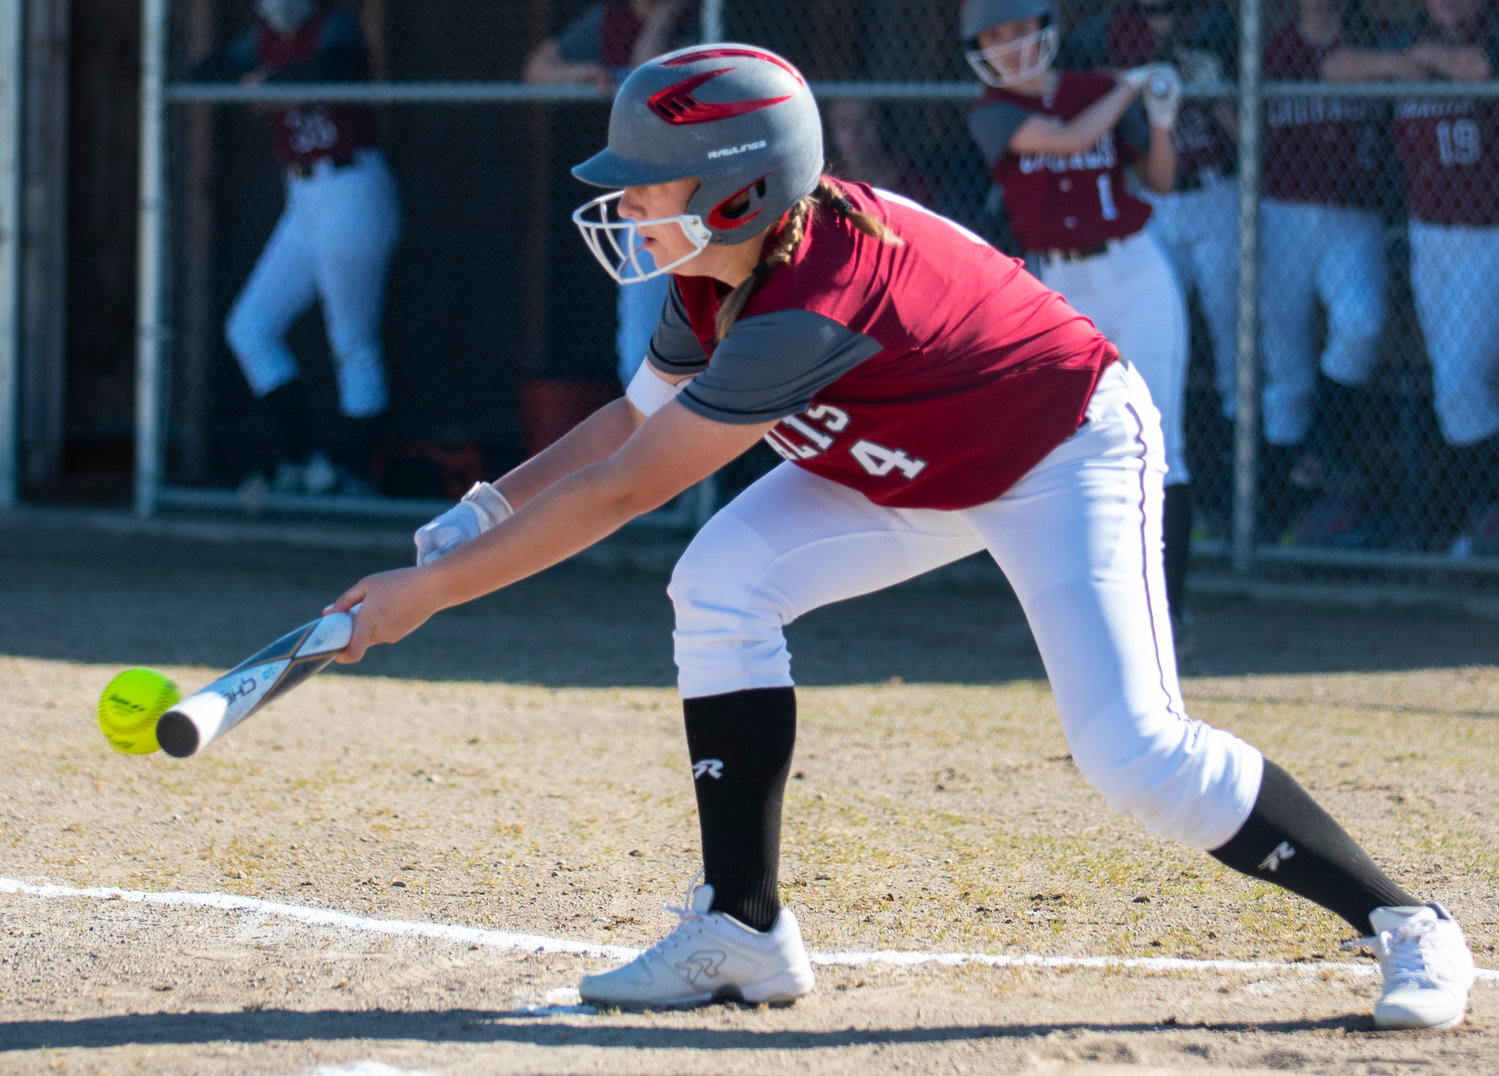 W.F. West's Lena Fragner lays down a bunt against Rochester on Friday.